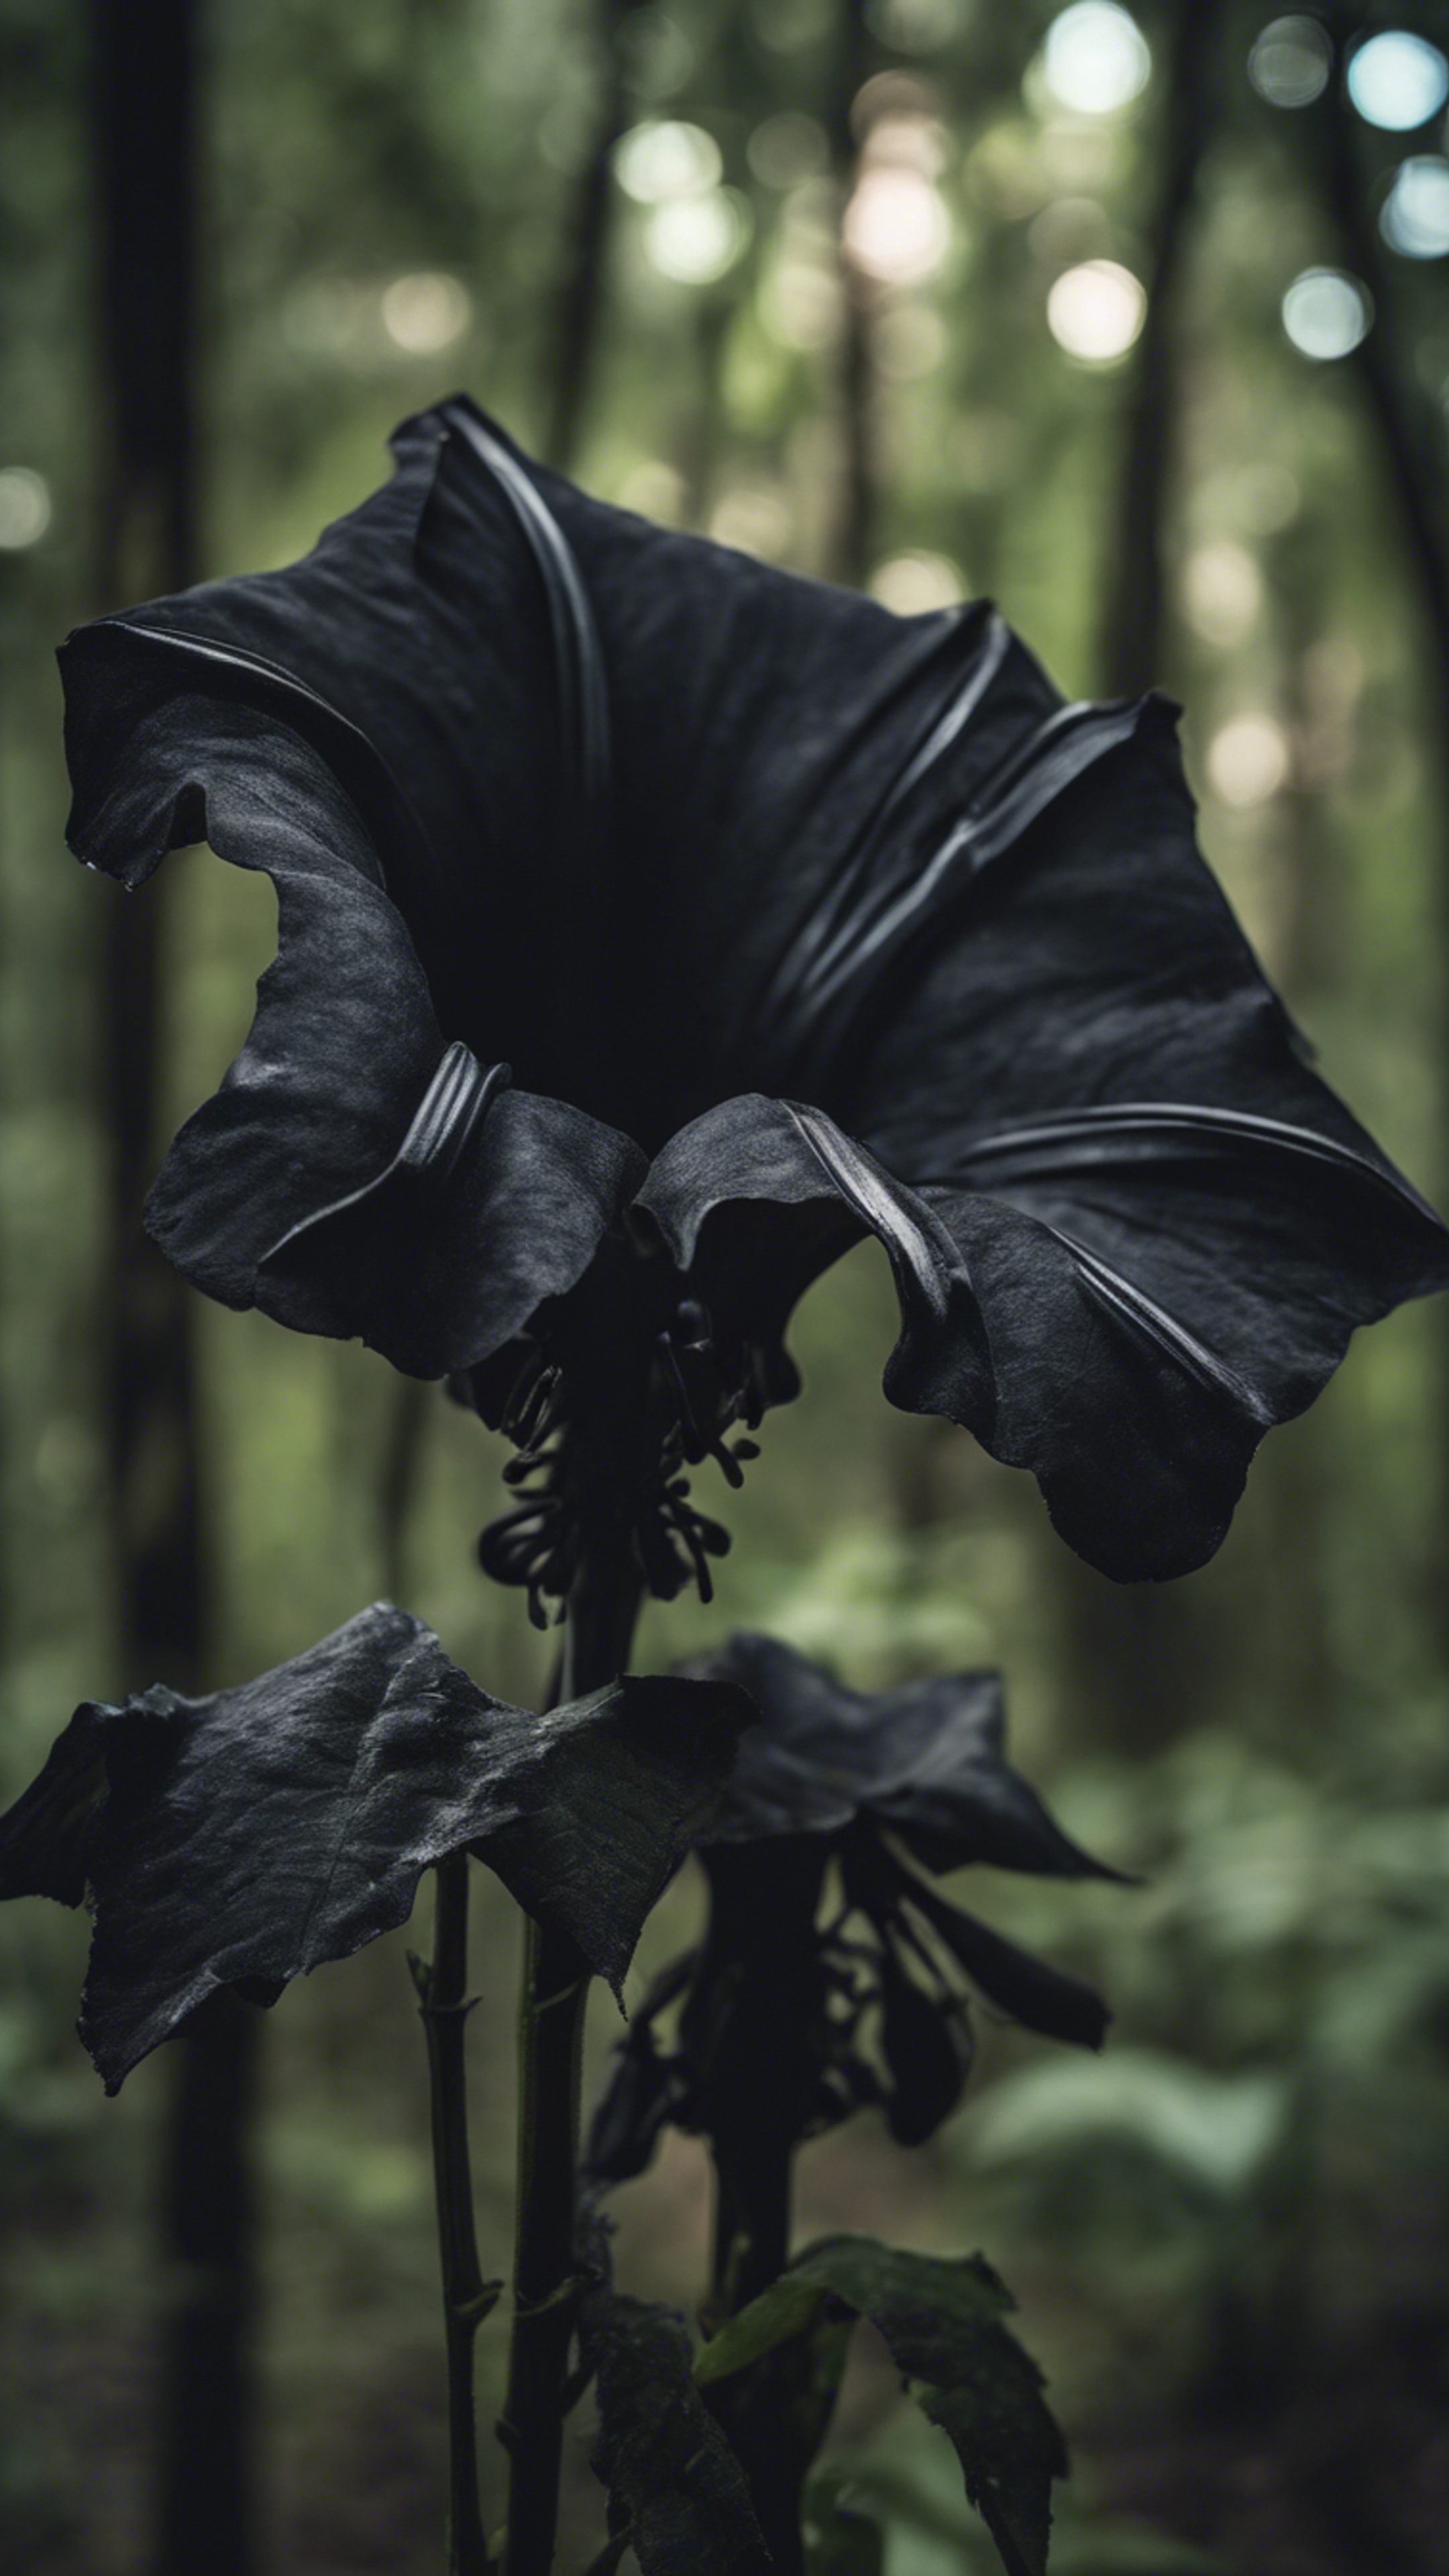 A black trumpet flower evoking an eerie yet captivating atmosphere in the heart of a dense forest. Fond d'écran[87d98efd7999478c8568]